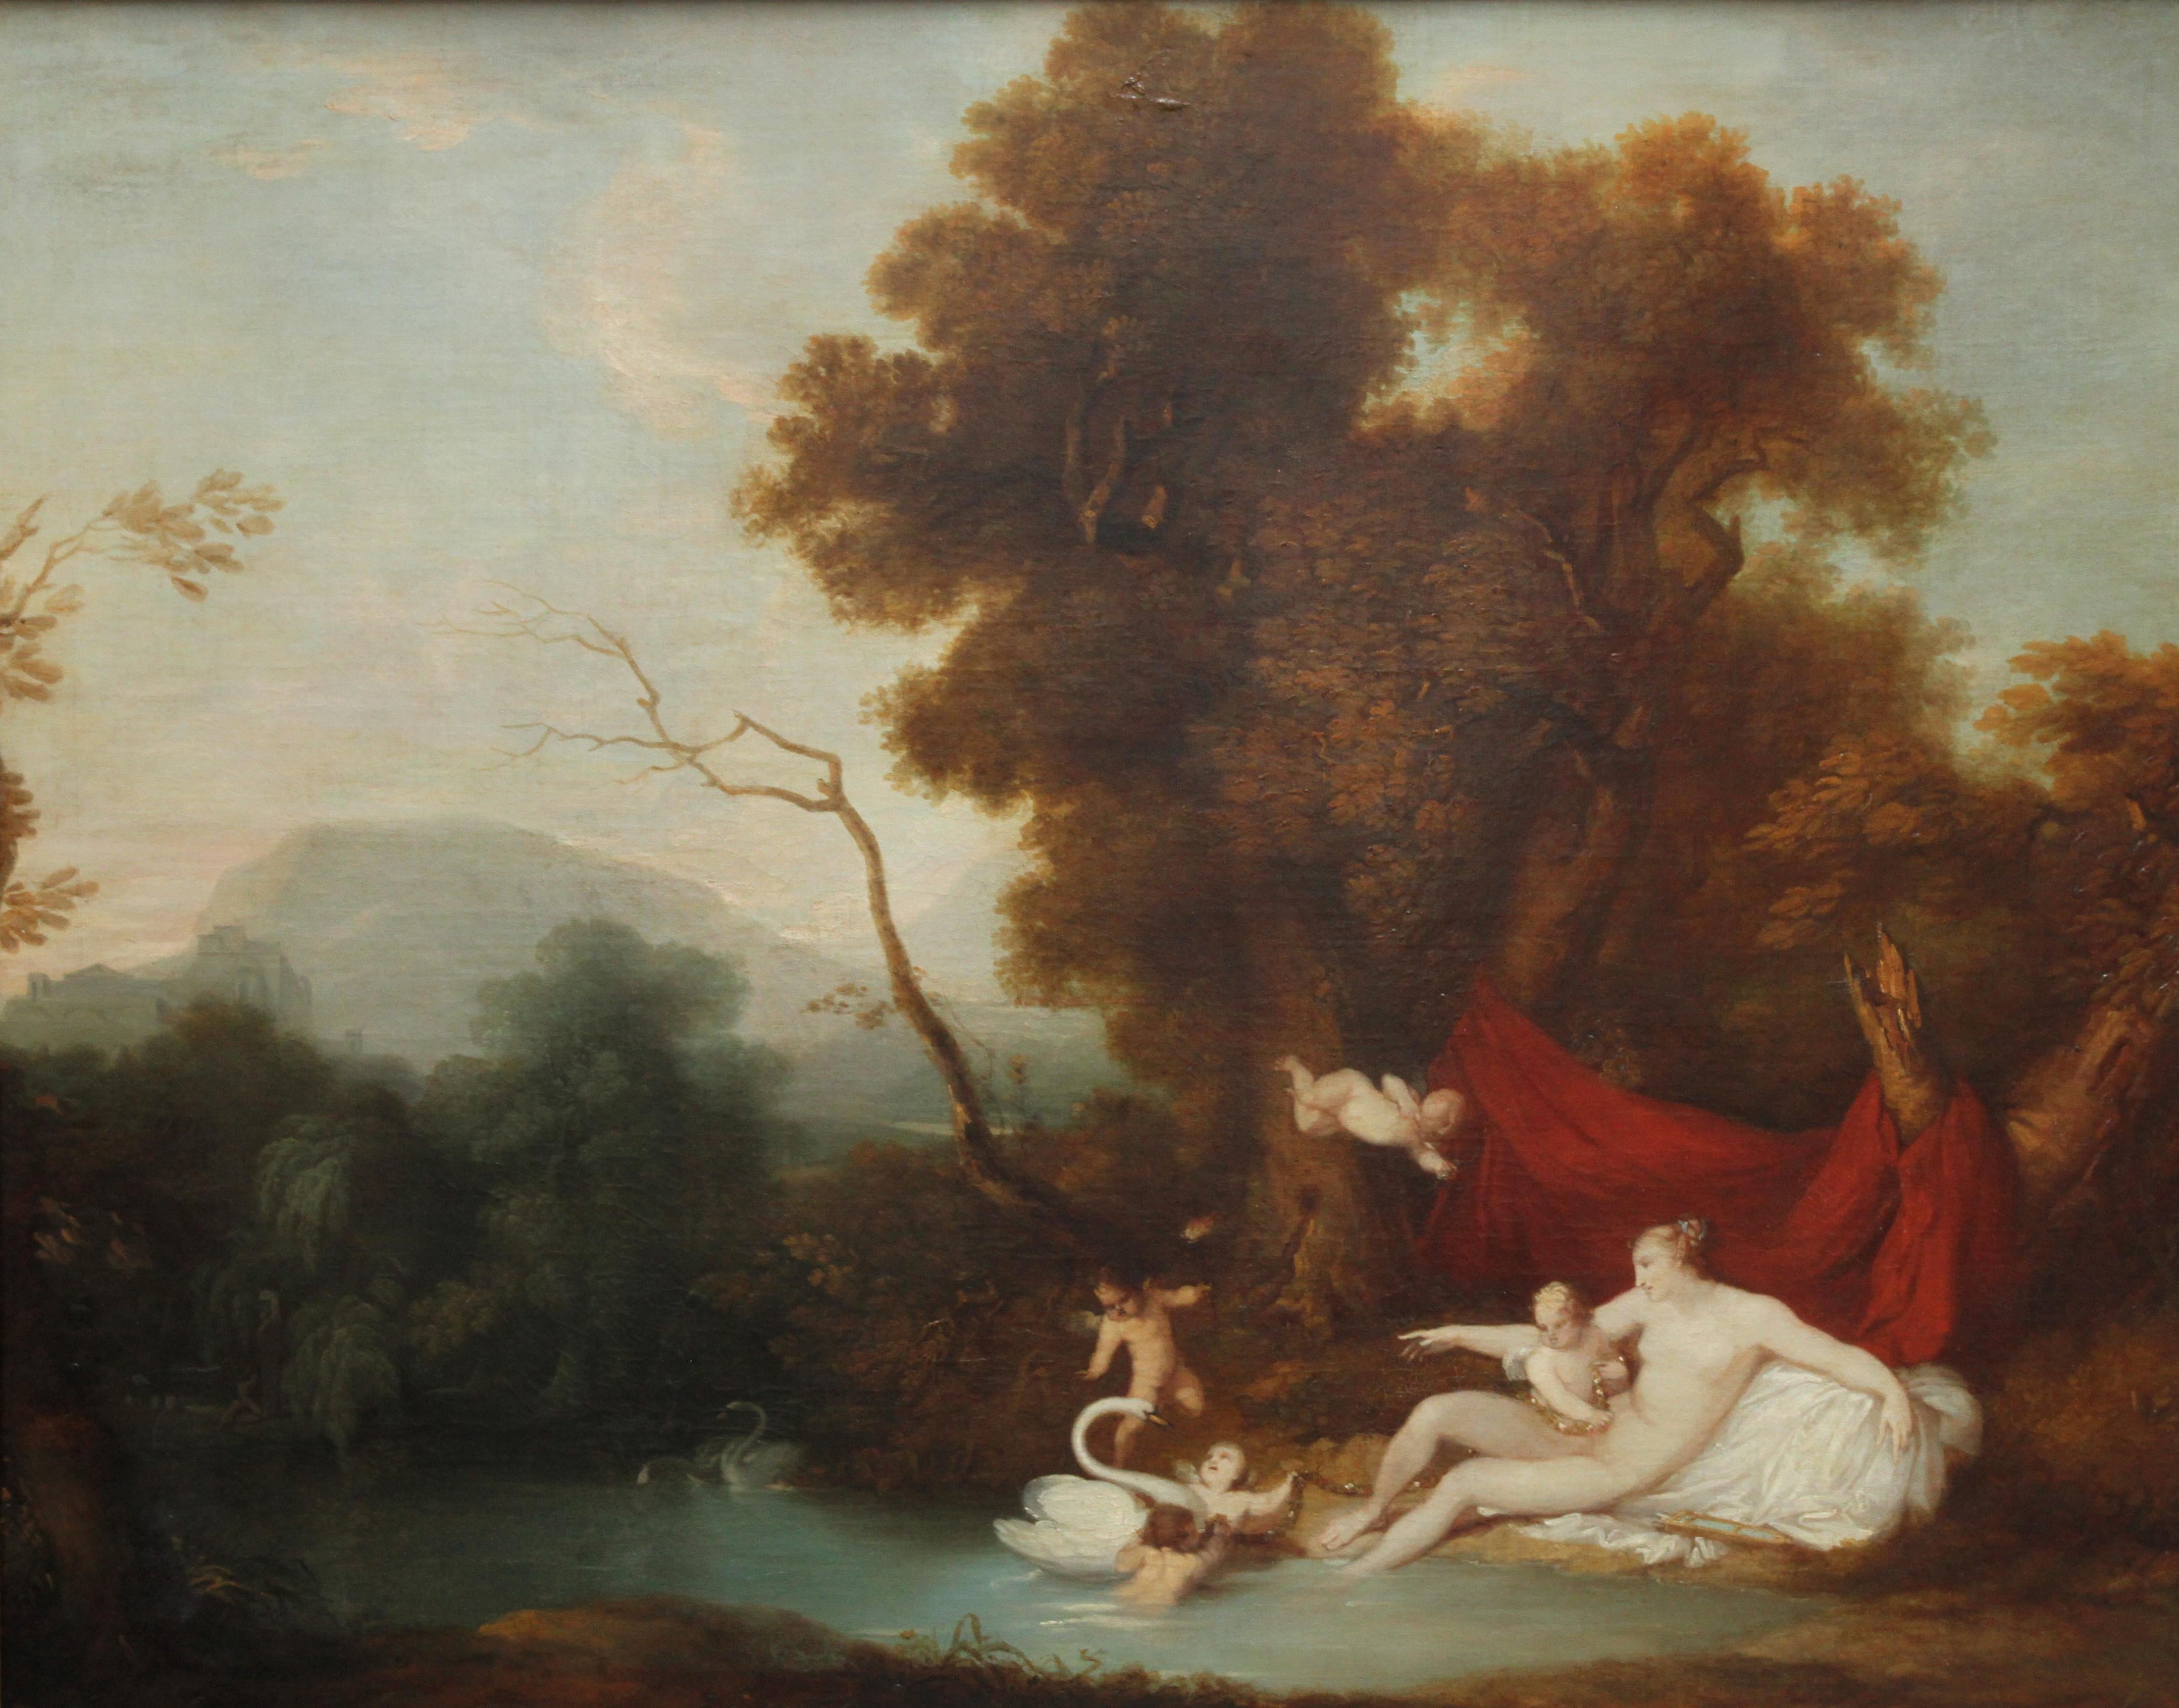 Leda and Swan - 18thC Old Master Continental School mythological oil painting - Painting by Francisco Viera Portuense